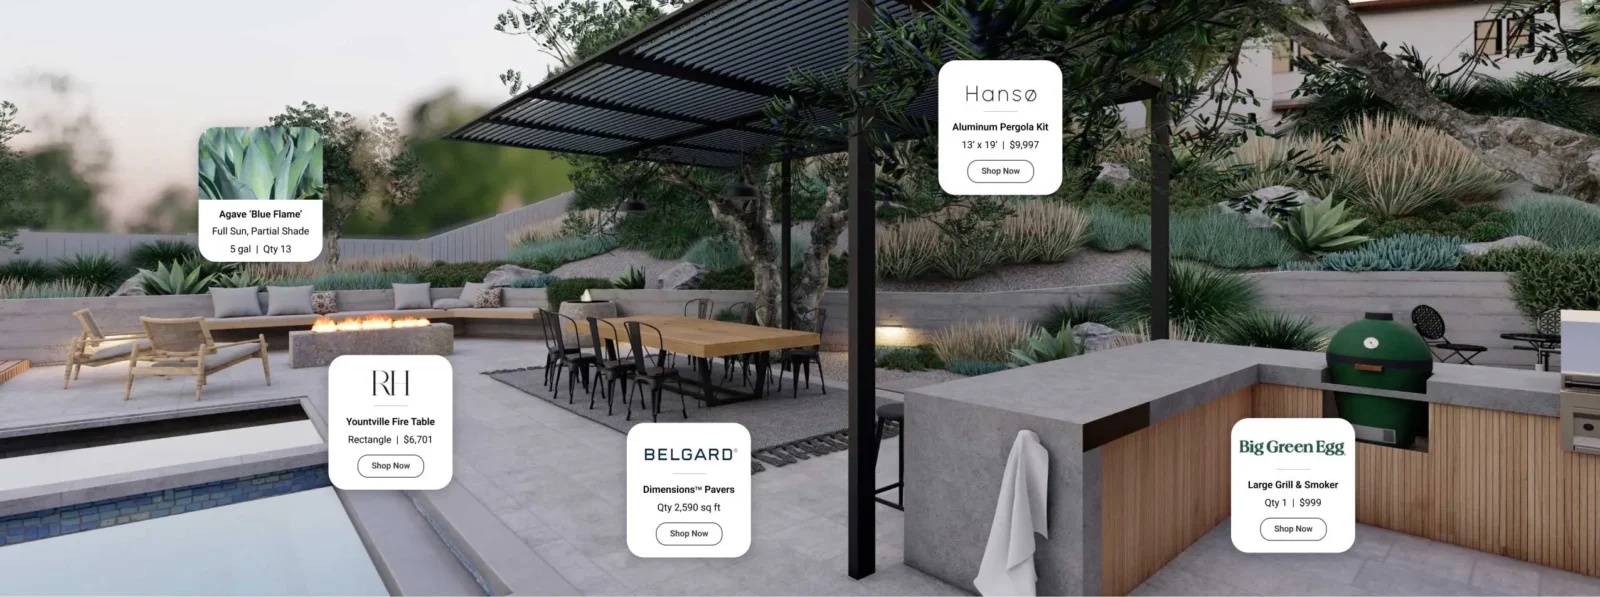 Yardzen render of a back yard with product names, brand and shopping button overlaid on it